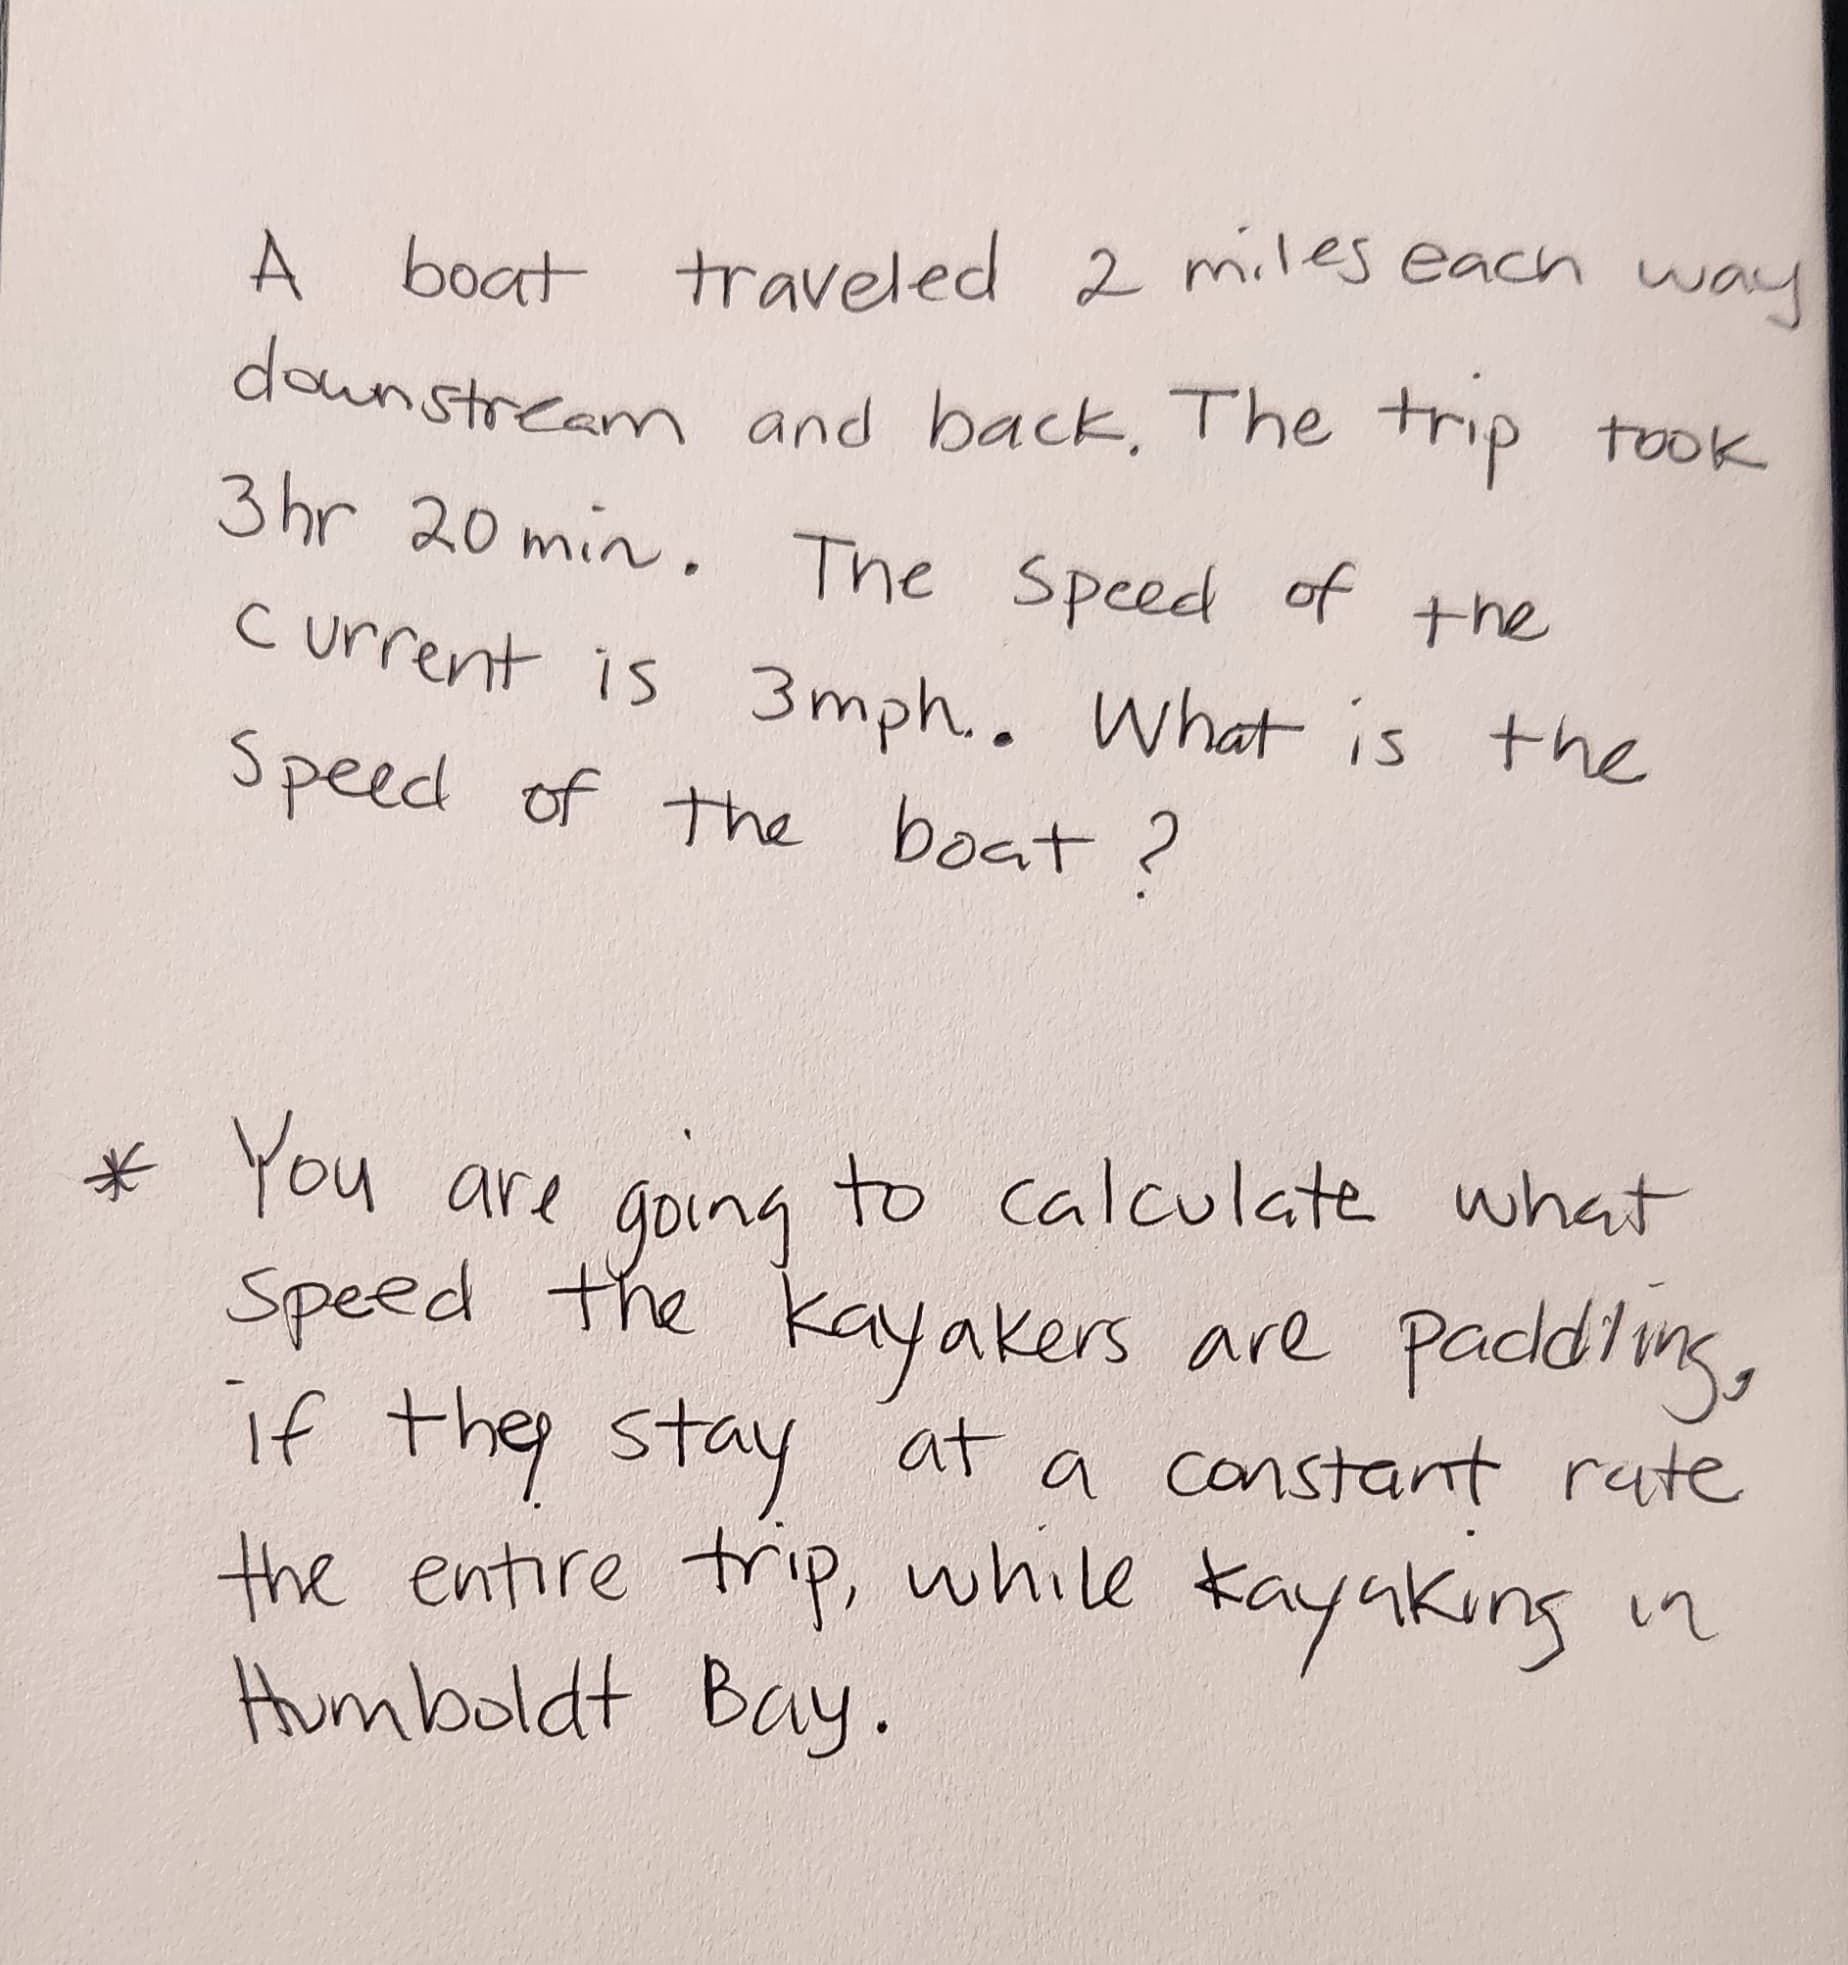 A boat traveled 2 miles each way
downstream and back. The trip took
3hr 20 min. The speed of the
Current is 3mph.. What is the
Speed of the boat?
* You are going to calculate what
Speed the kayakers are paddling,
if they stay at a constant rate
the entire trip, while kayaking in
Humboldt Bay.